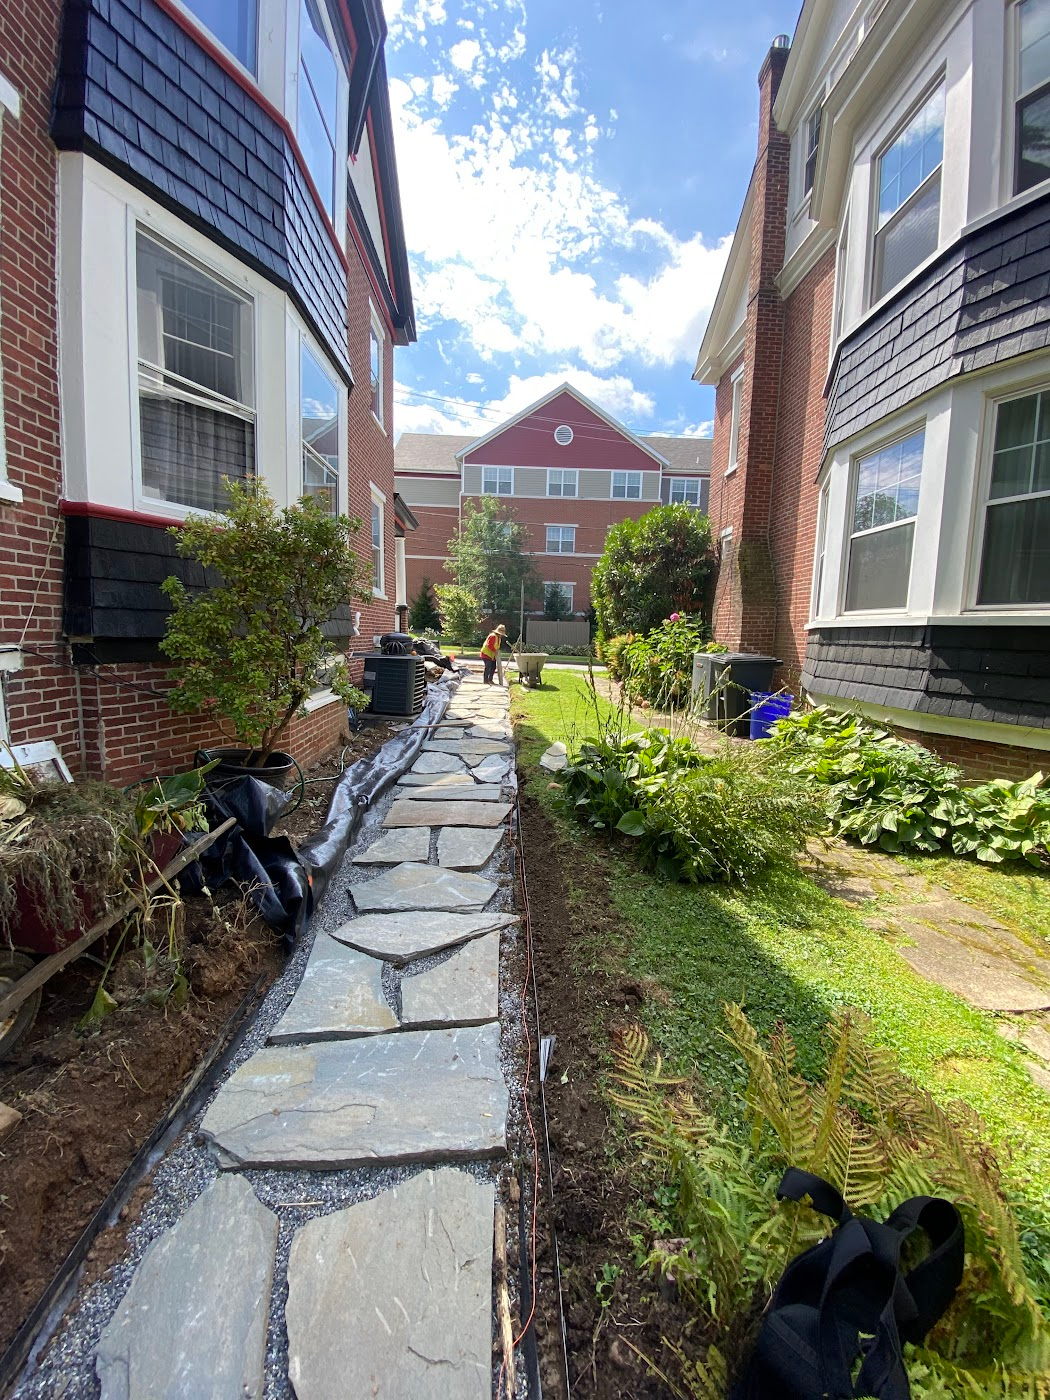 Hardscaping Chester County. Retaining walls, building patio, fire pits, outdoor kitchens.